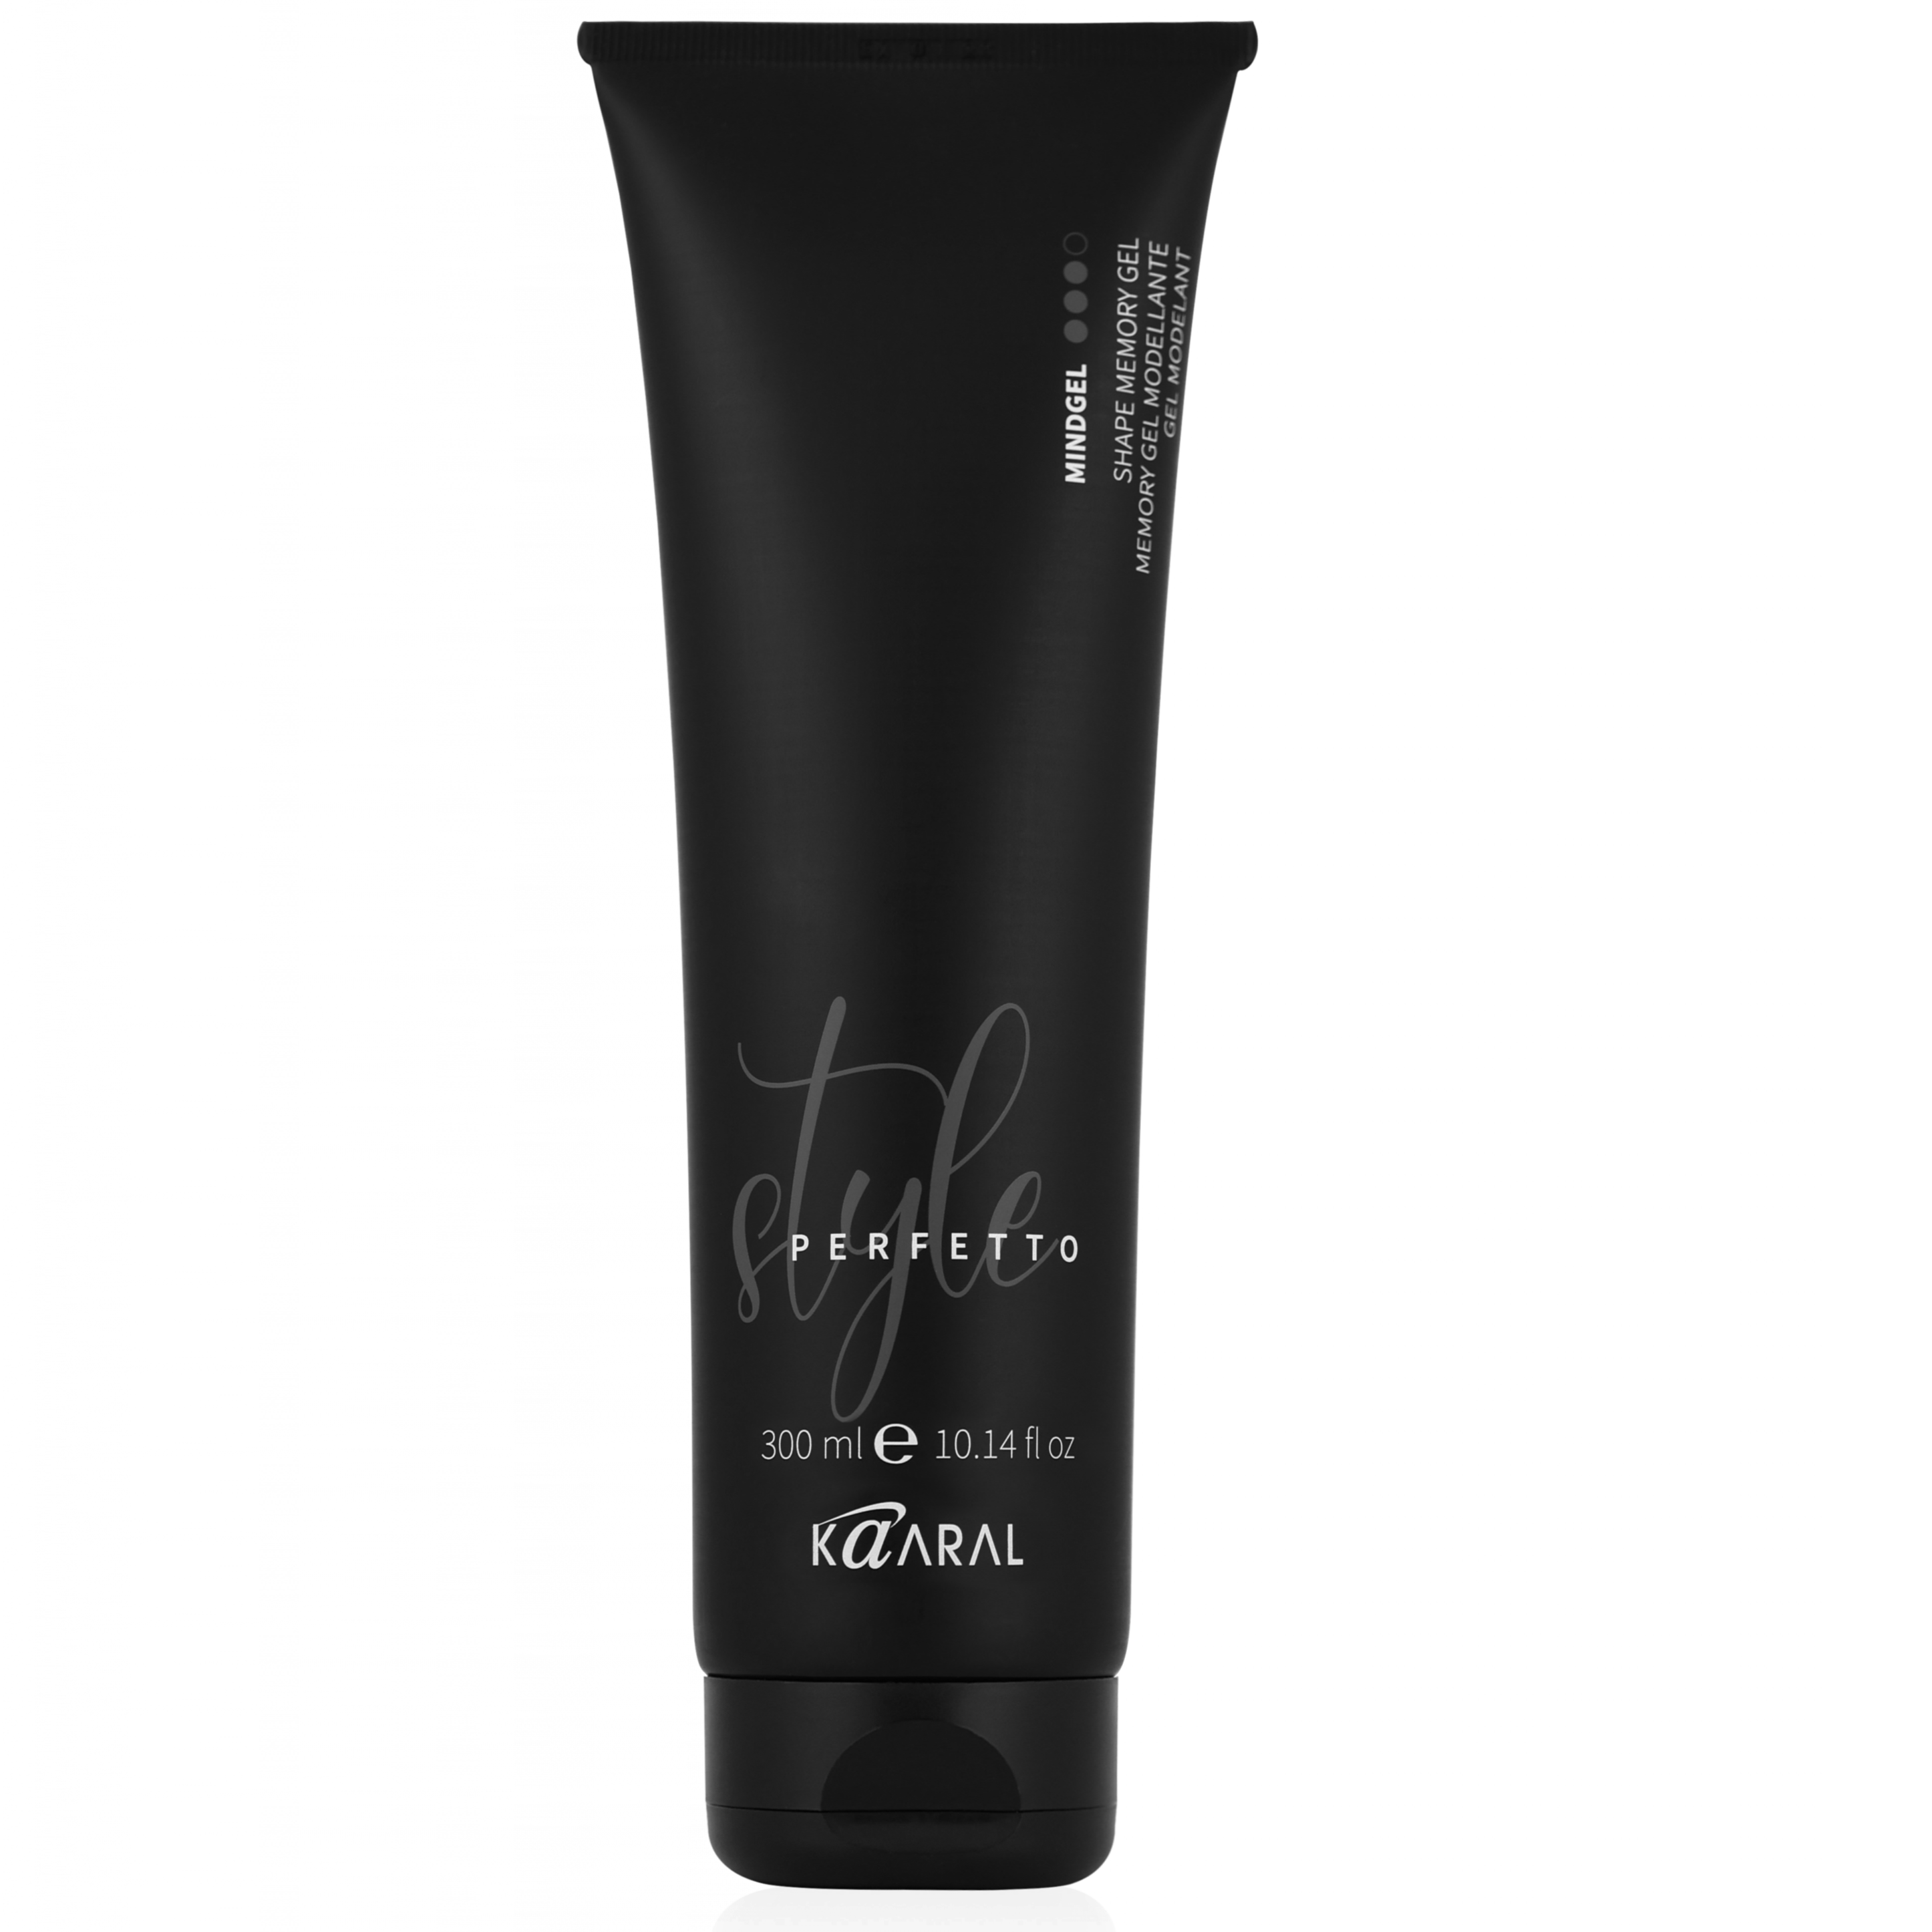 Kaaral - Style Perfetto Mindgel Shape Memory Gel :: NEW PACKAGING - Creata Beauty - Professional Beauty Products